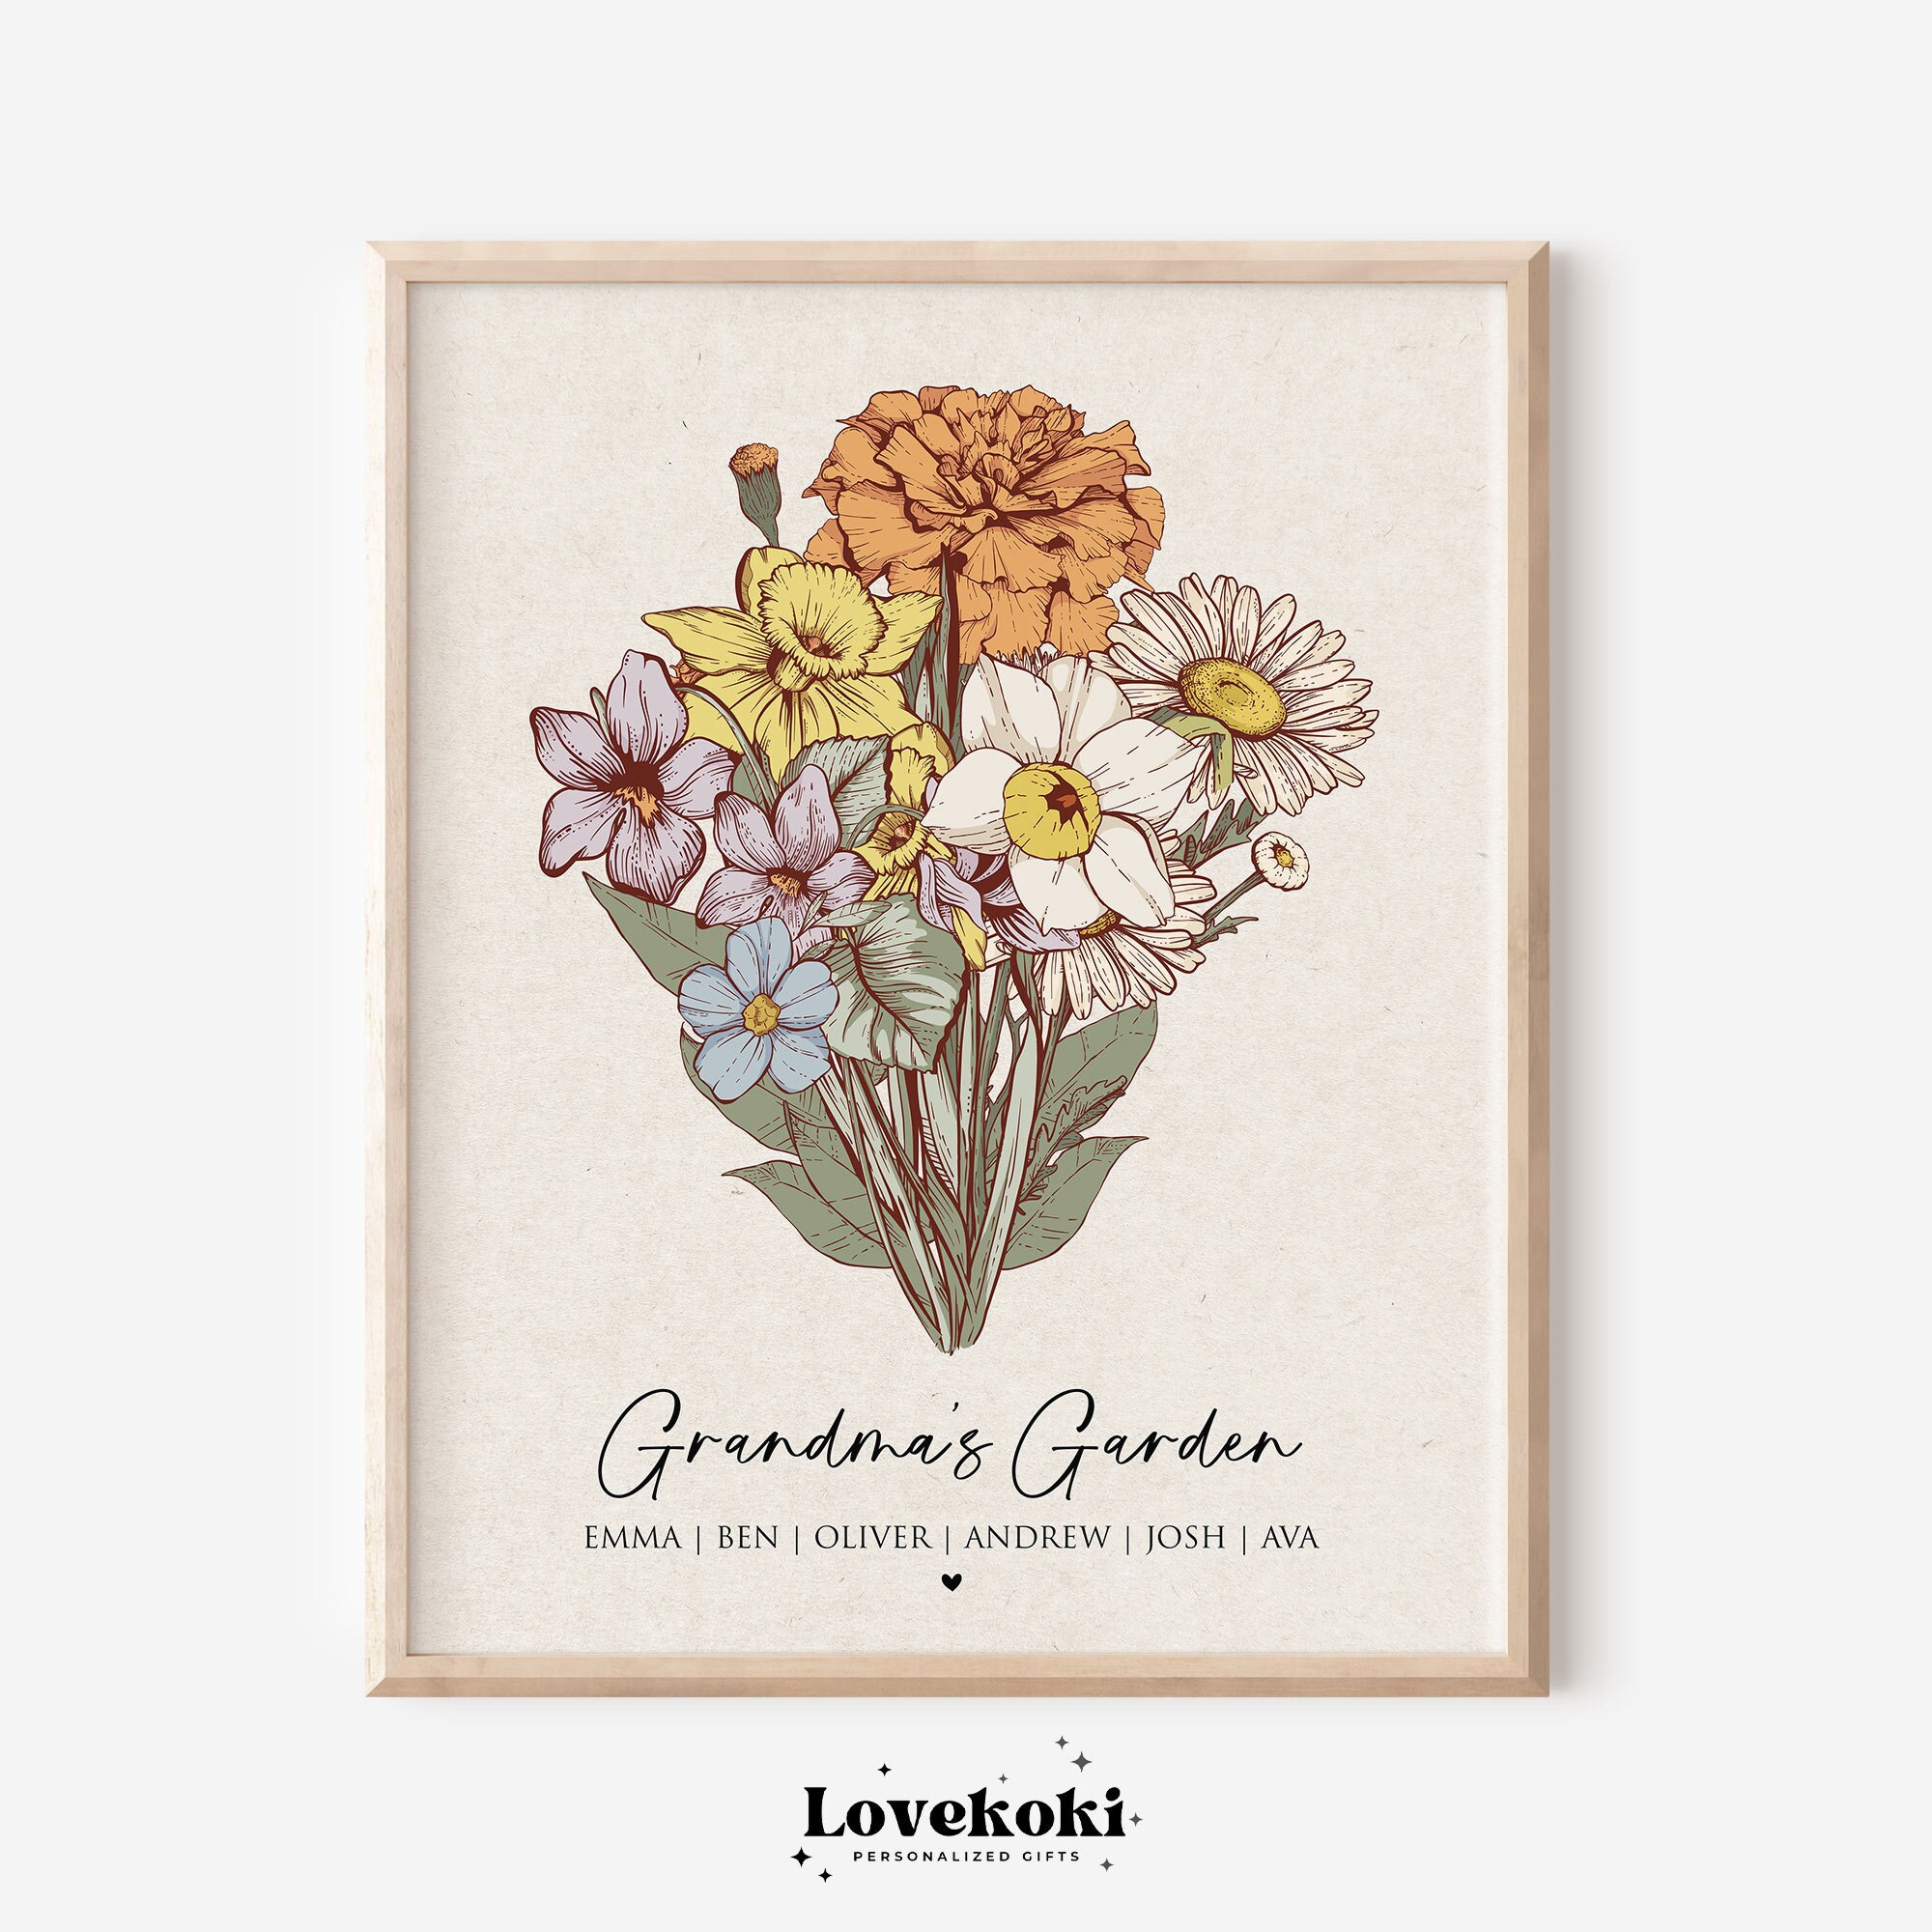 Christmas Gifts for Mom、Grandma, Customized Birth Month Flower Mother's  Garden、Grandma's Garden, Custom Canvas with Names Wall Art Birthday Gifts